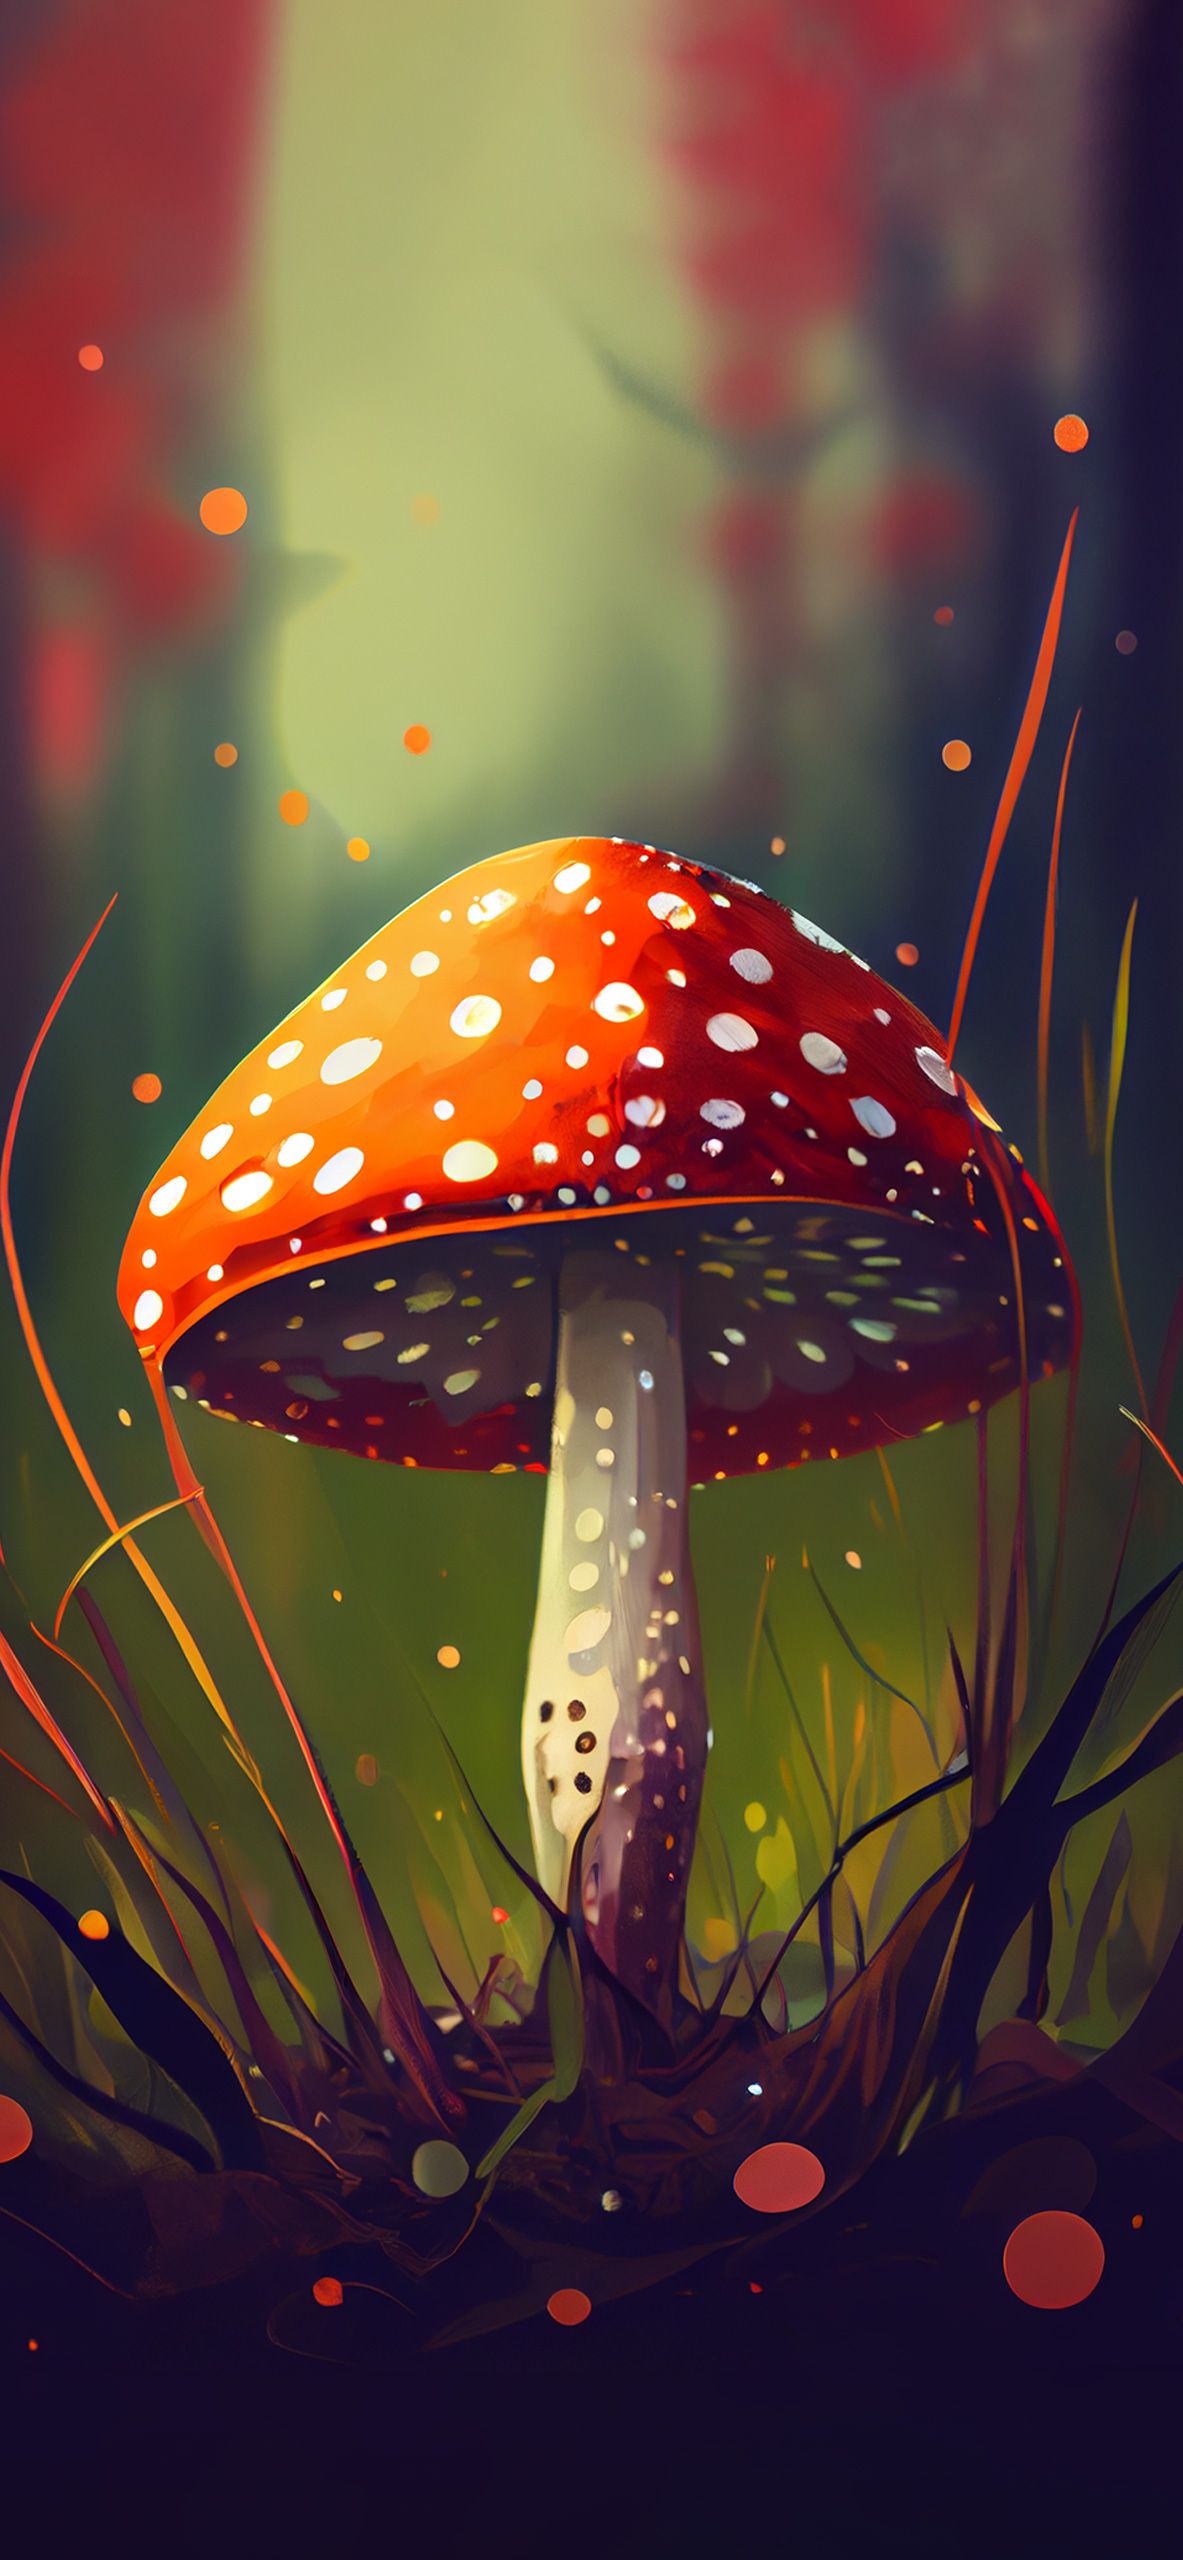 A painting of a mushroom with a red hat and white spots - Illustration